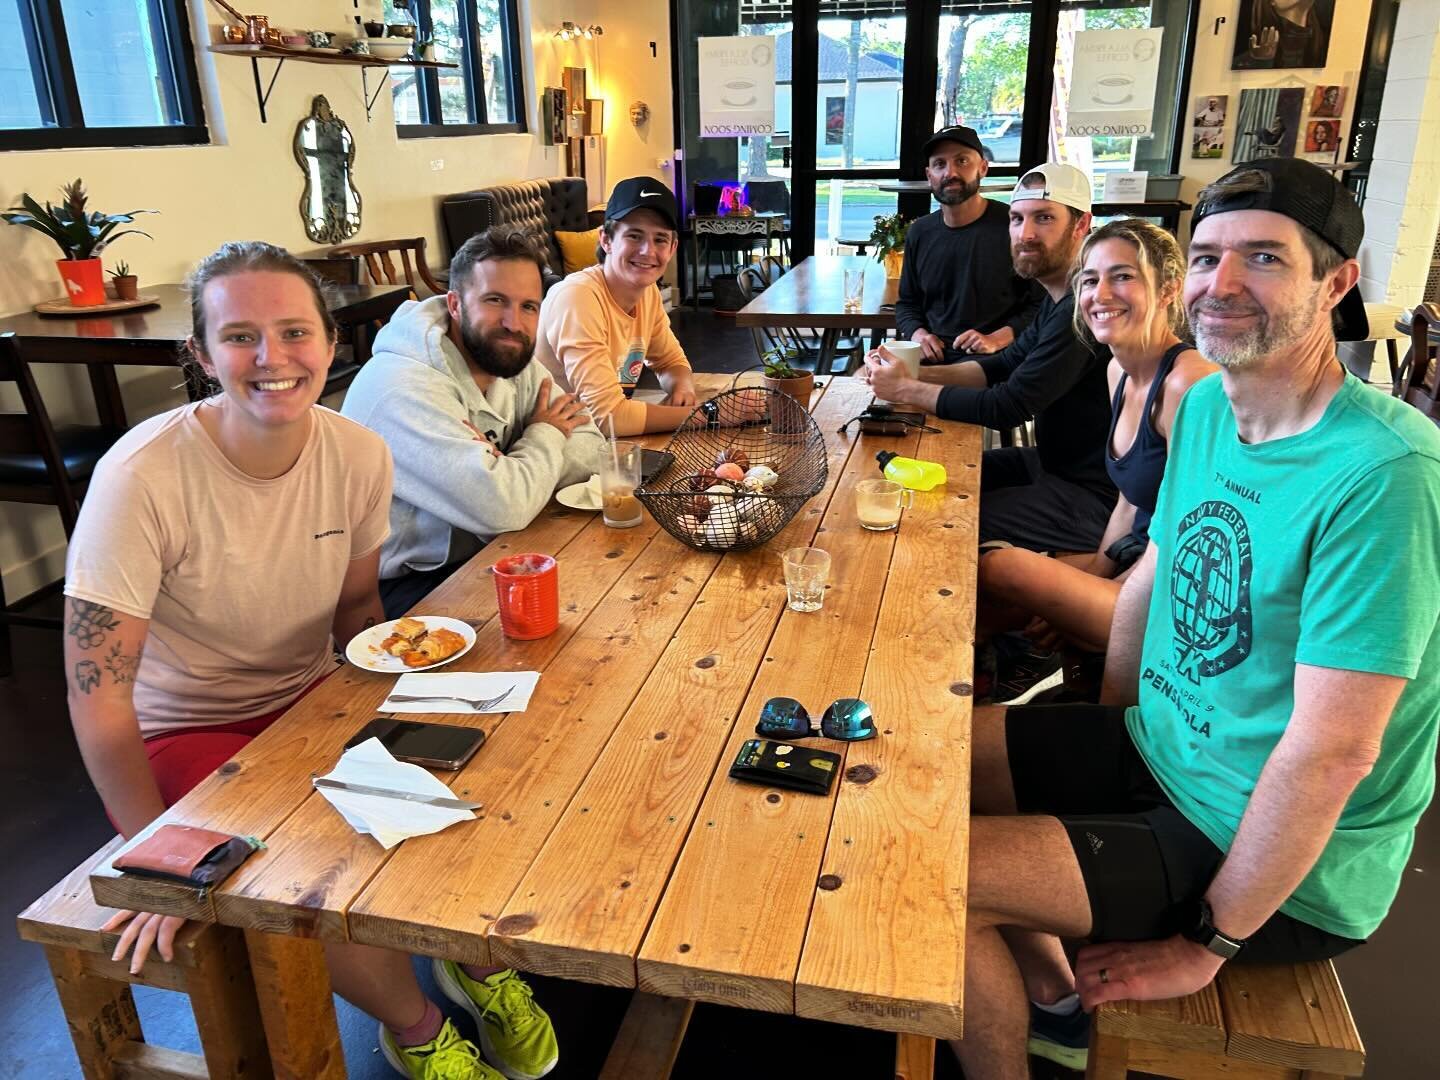 We love our regulars! Pictured is the Friday running group from @fleetfeetpensacola , who come in every week for the post-running fix! Cheers to that!
#allaprimacoffee #fleetfeet #pensacolarunners #running #coffee #coffeetime #coffeeshopsofpensacola 